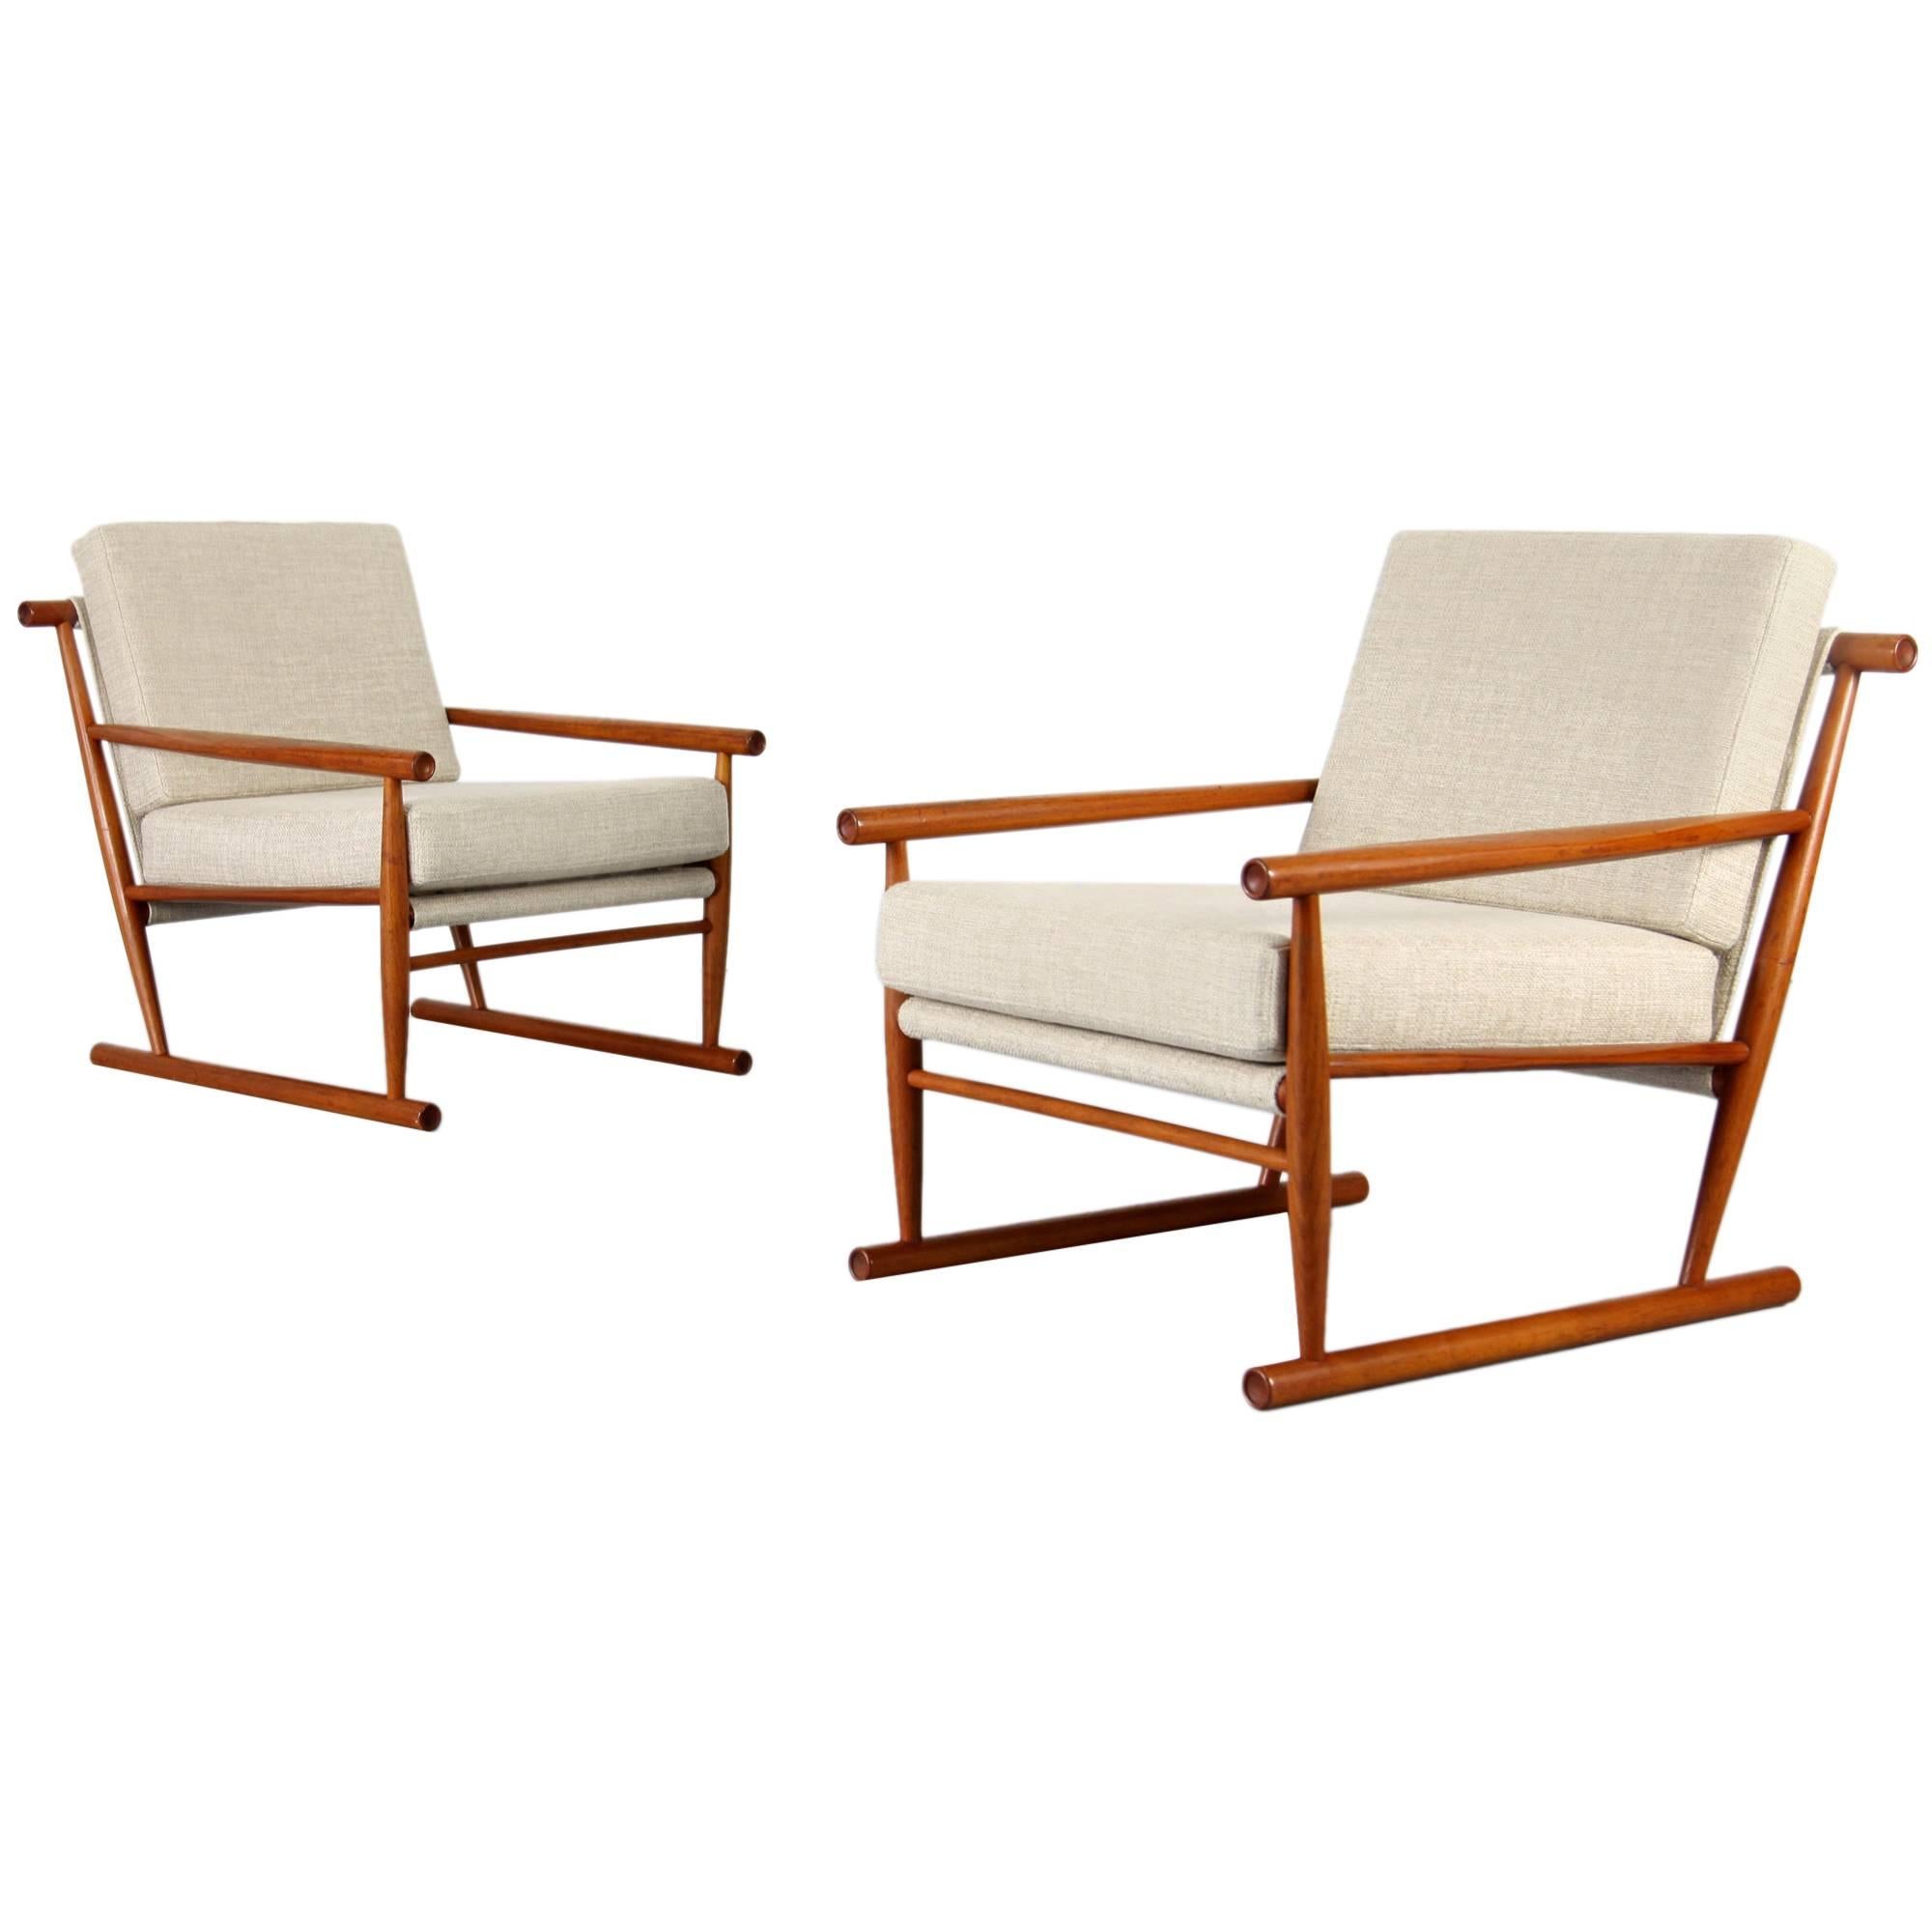 Set of Two Danish Teak Easy Chairs from the 1960s